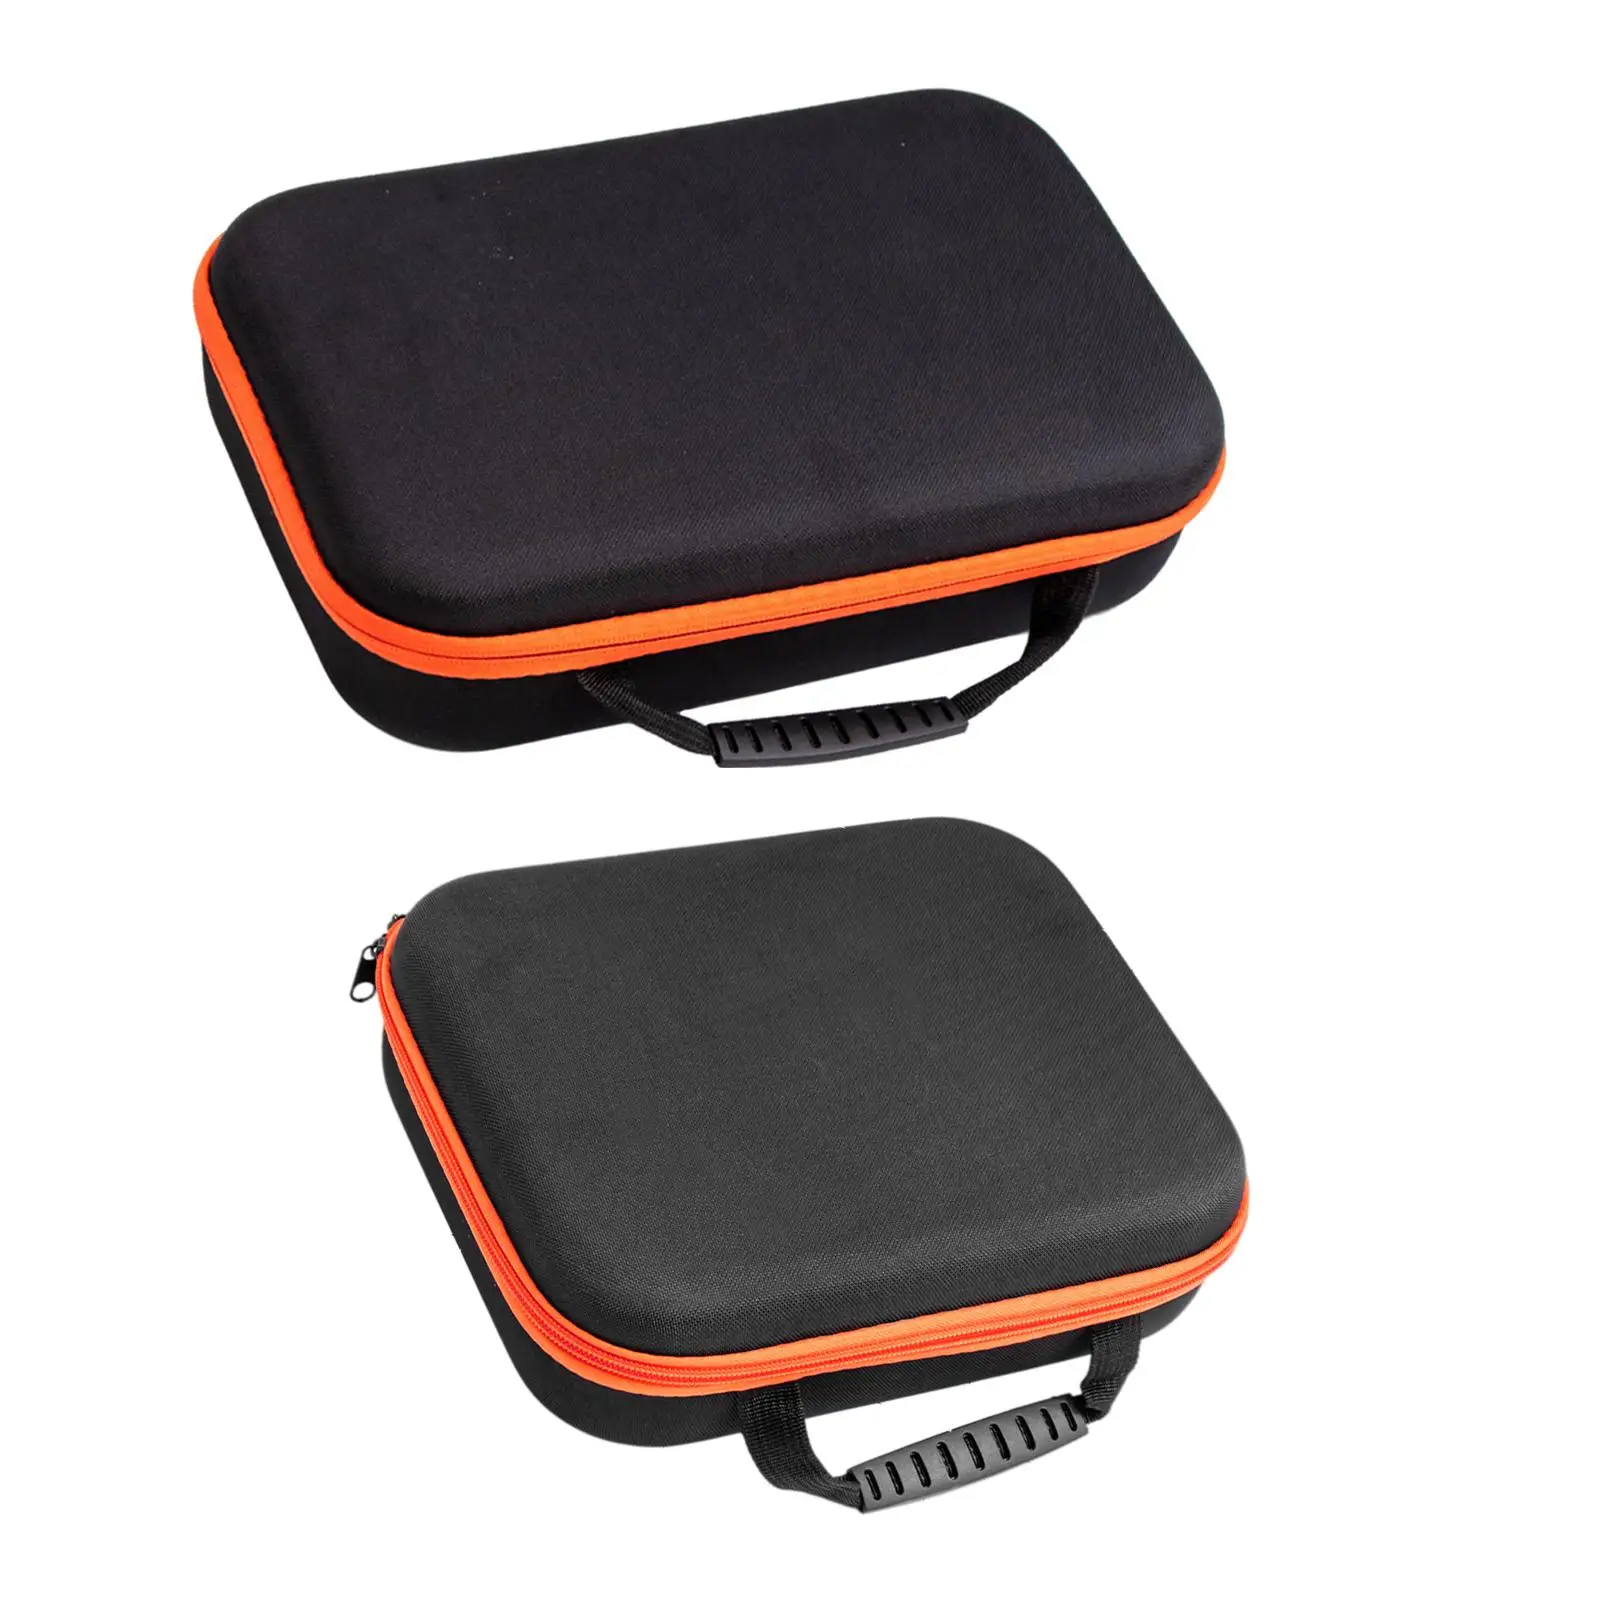 Multifunctional Tool Bag Case Portable External Oxford Cloth for Worker Electronic Tools